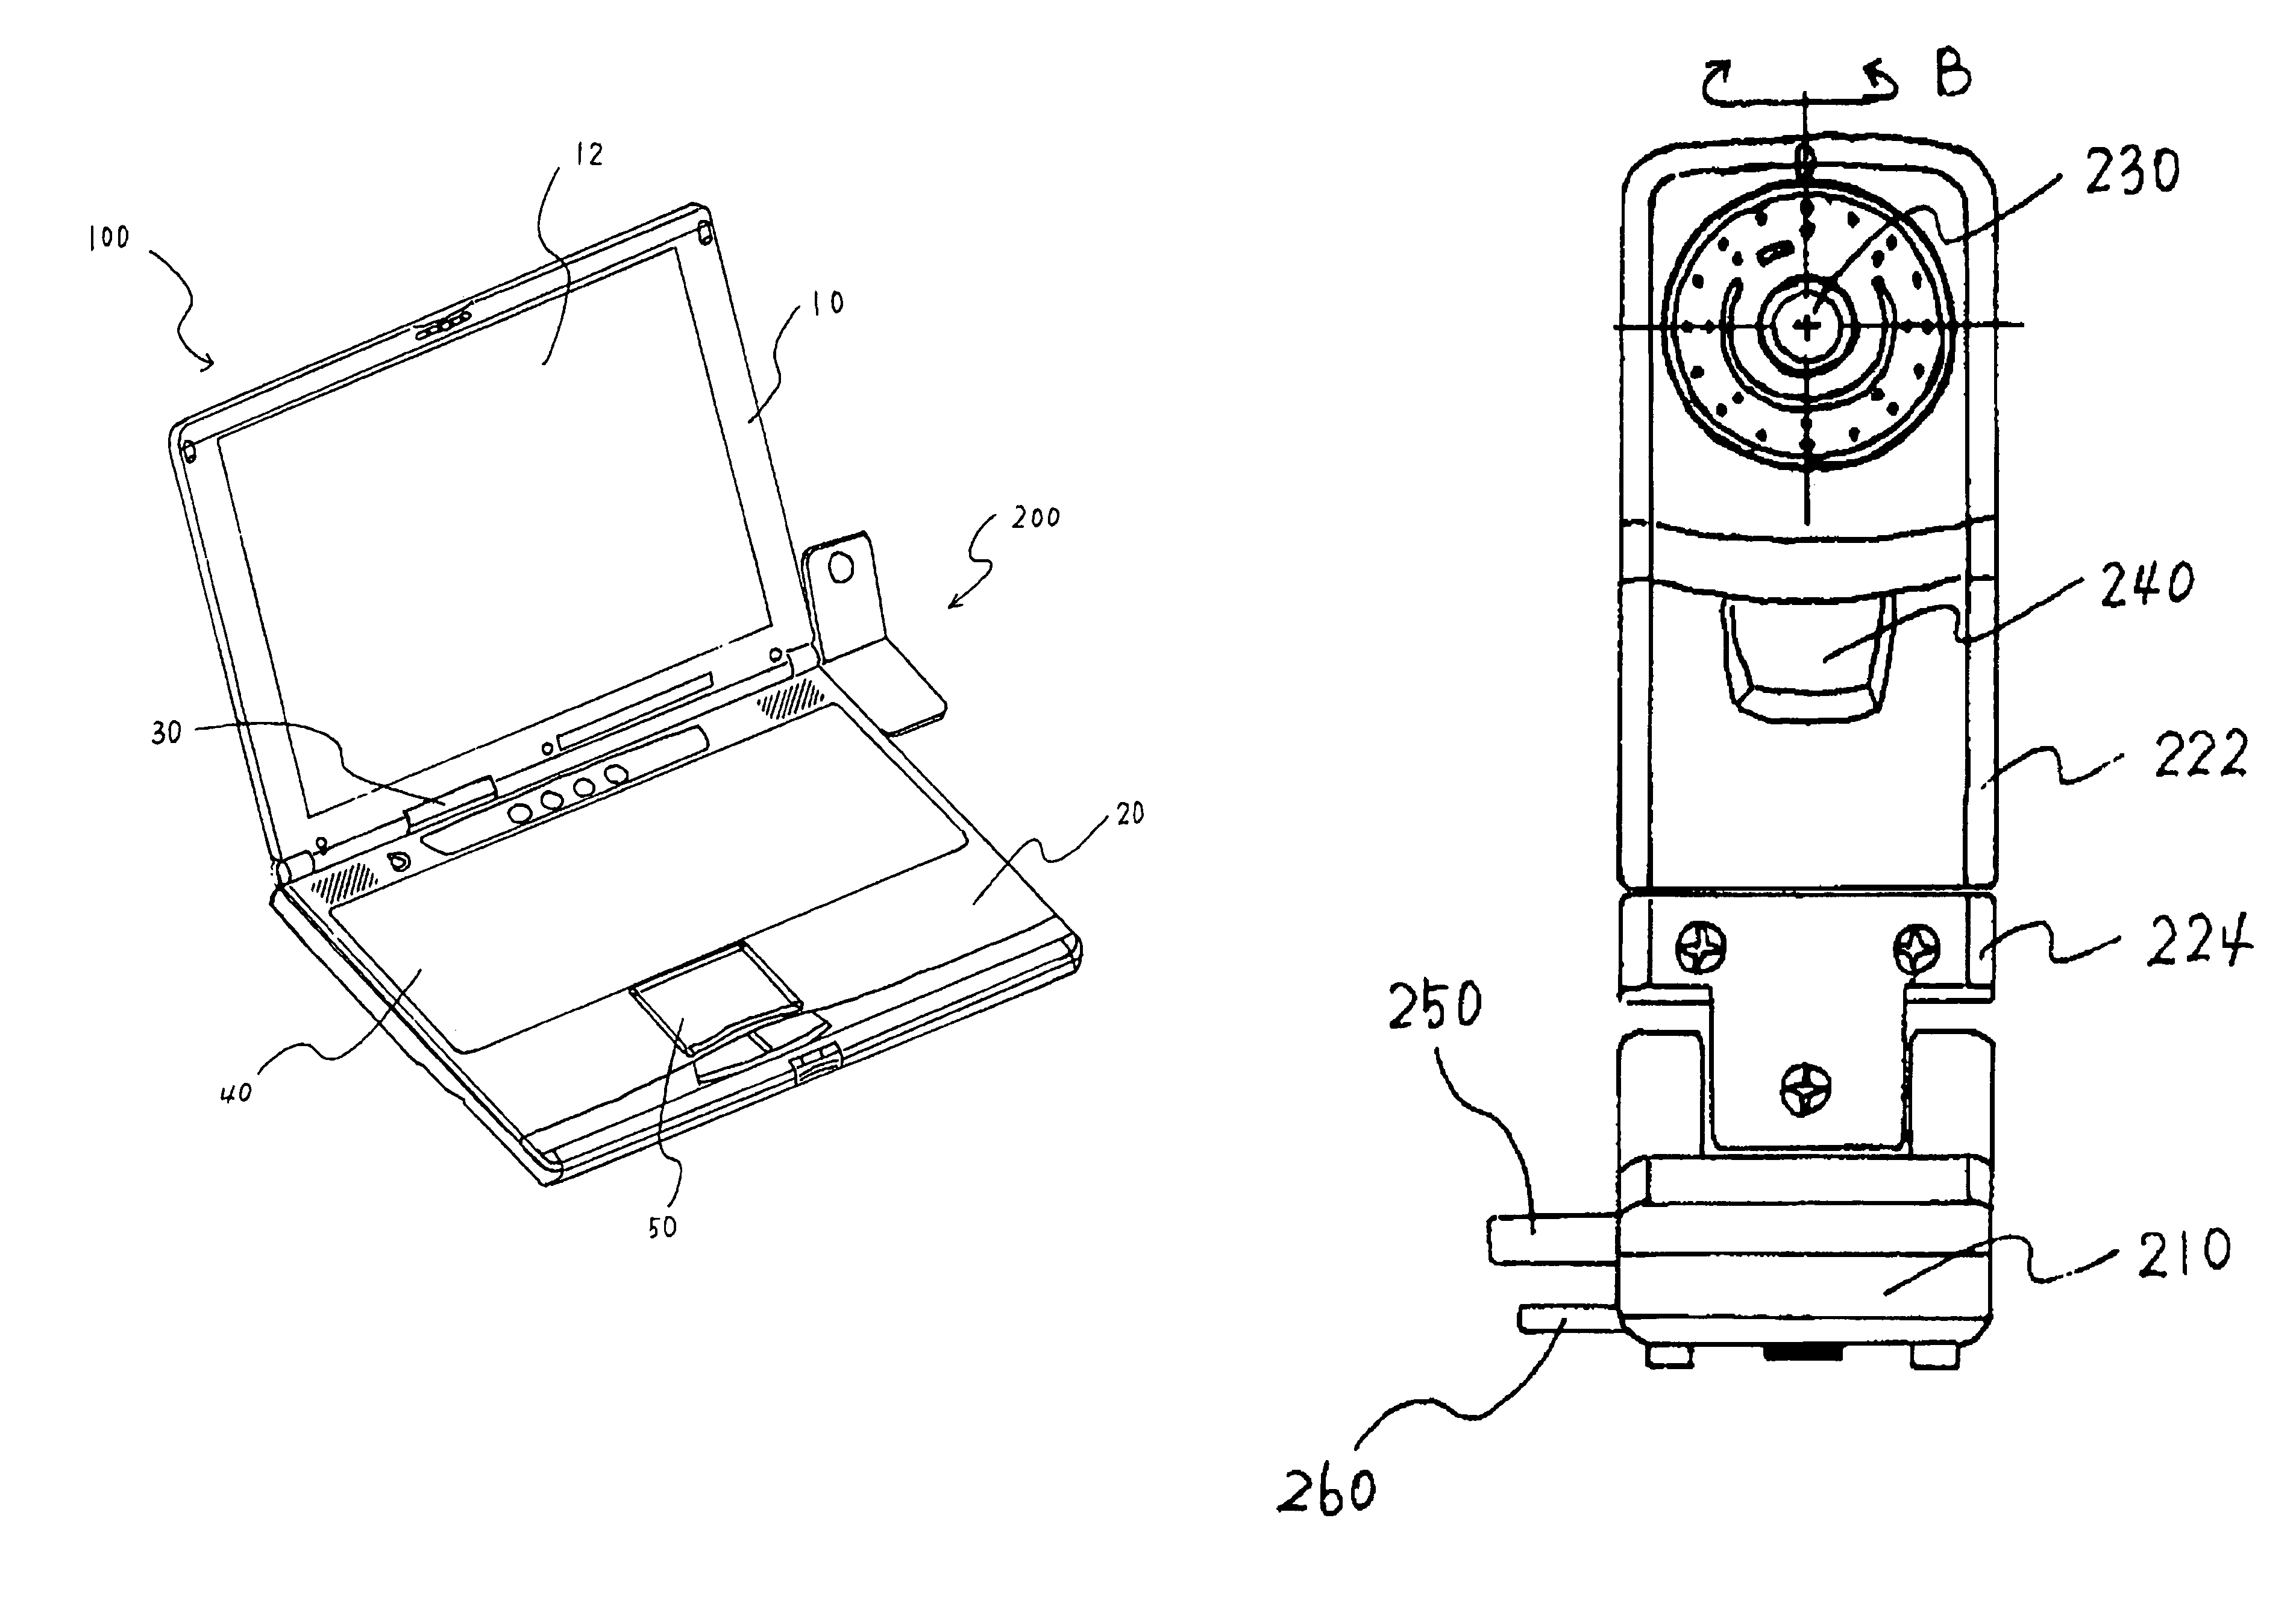 Image pickup device attachable to electronic apparatus